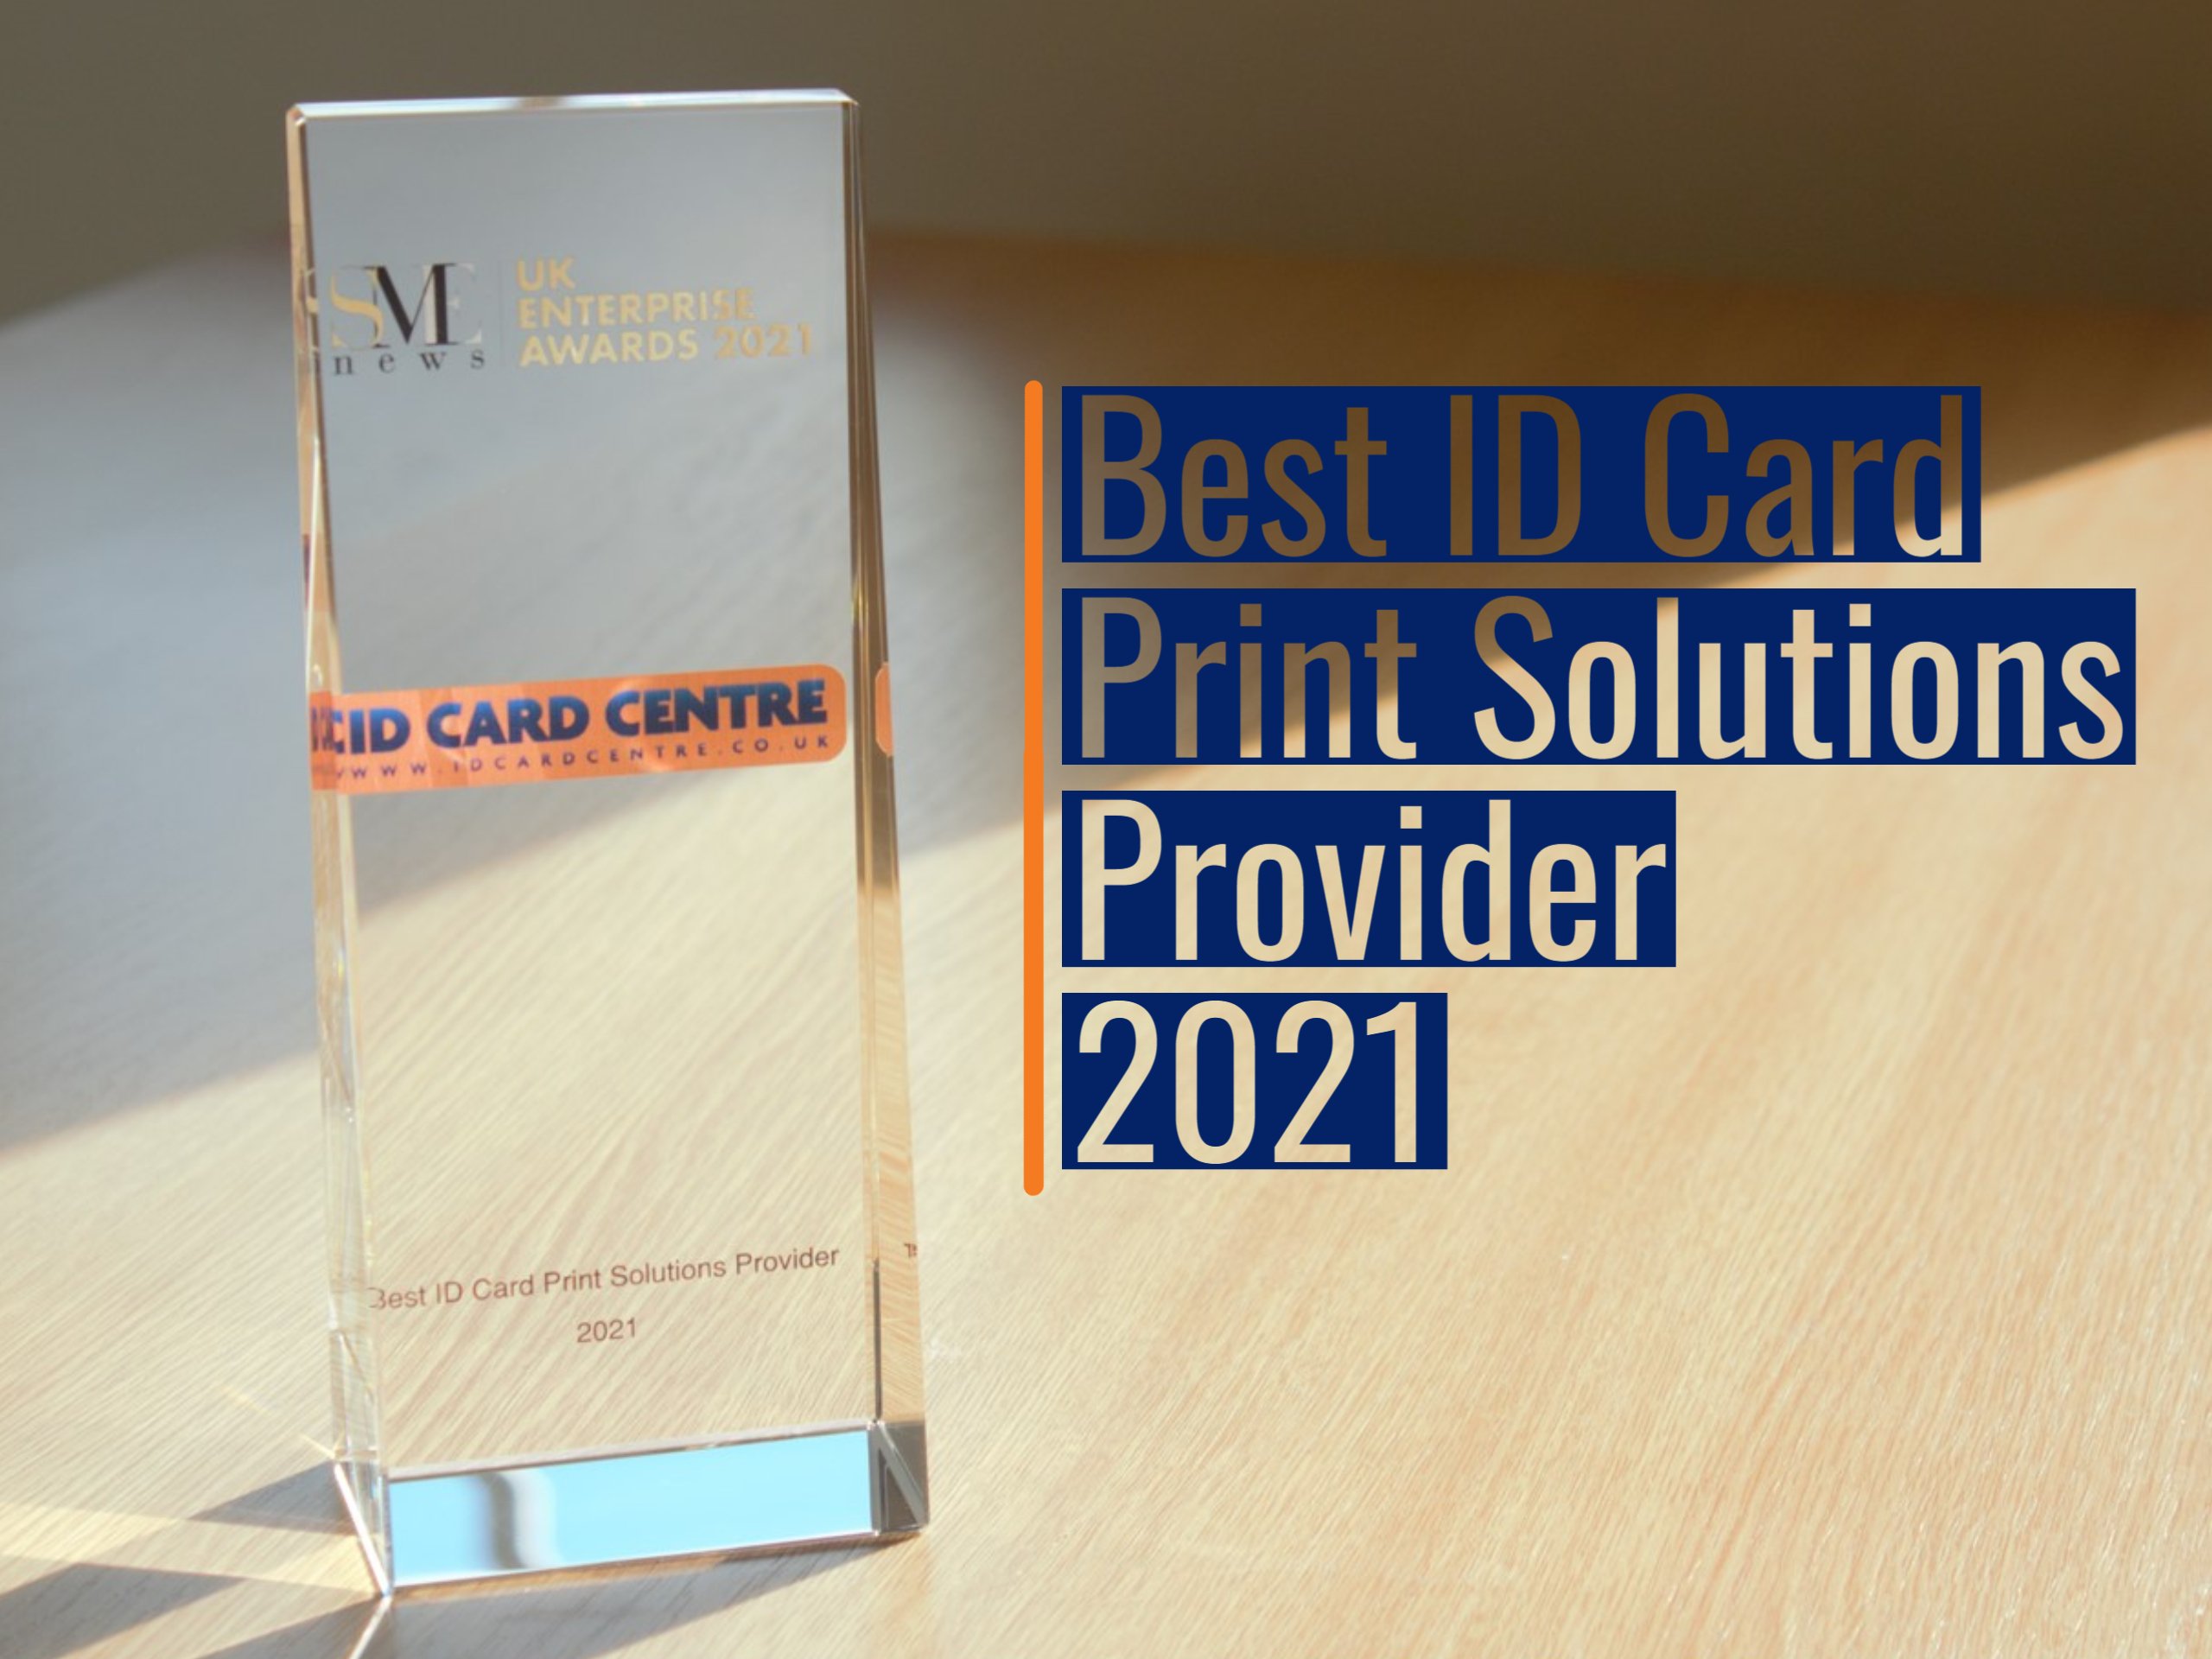  ID Card Centre won The Best ID Card Print Solutions Provider 2021 for the SME News UK Enterprise Awards 2021 